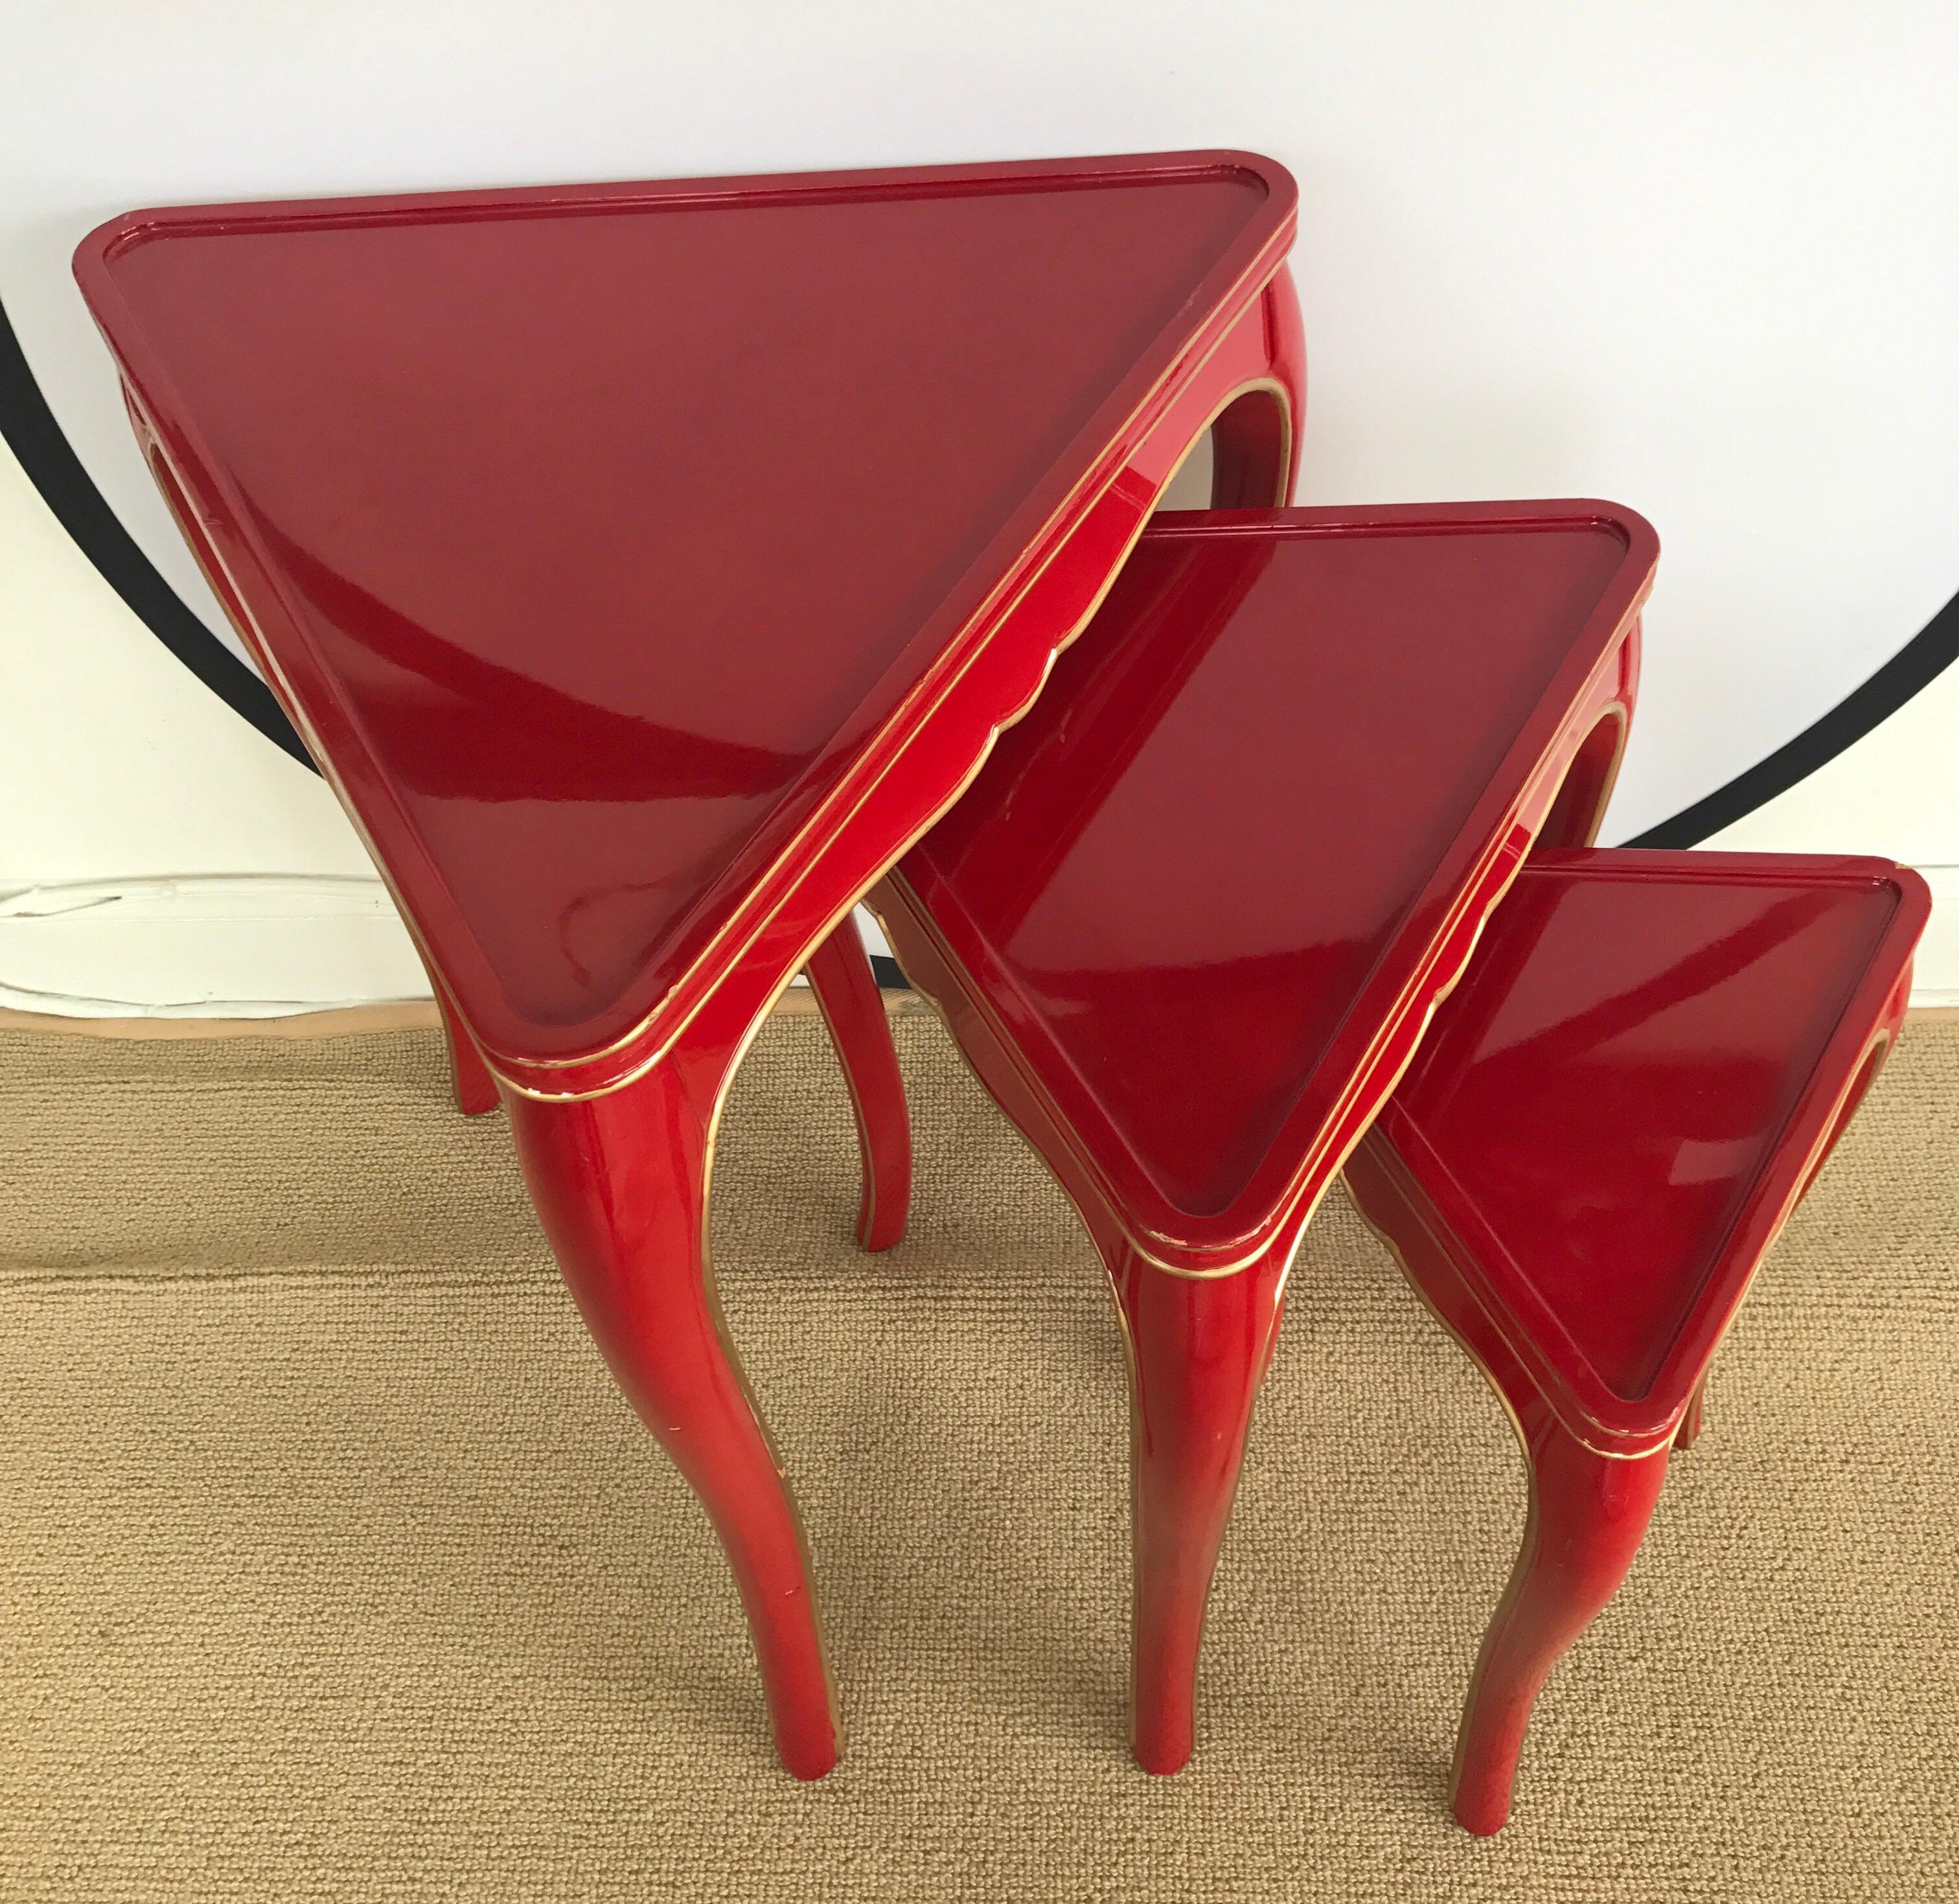 Elegant set of three matching red lacquered nesting tables that have graduating heights of 26